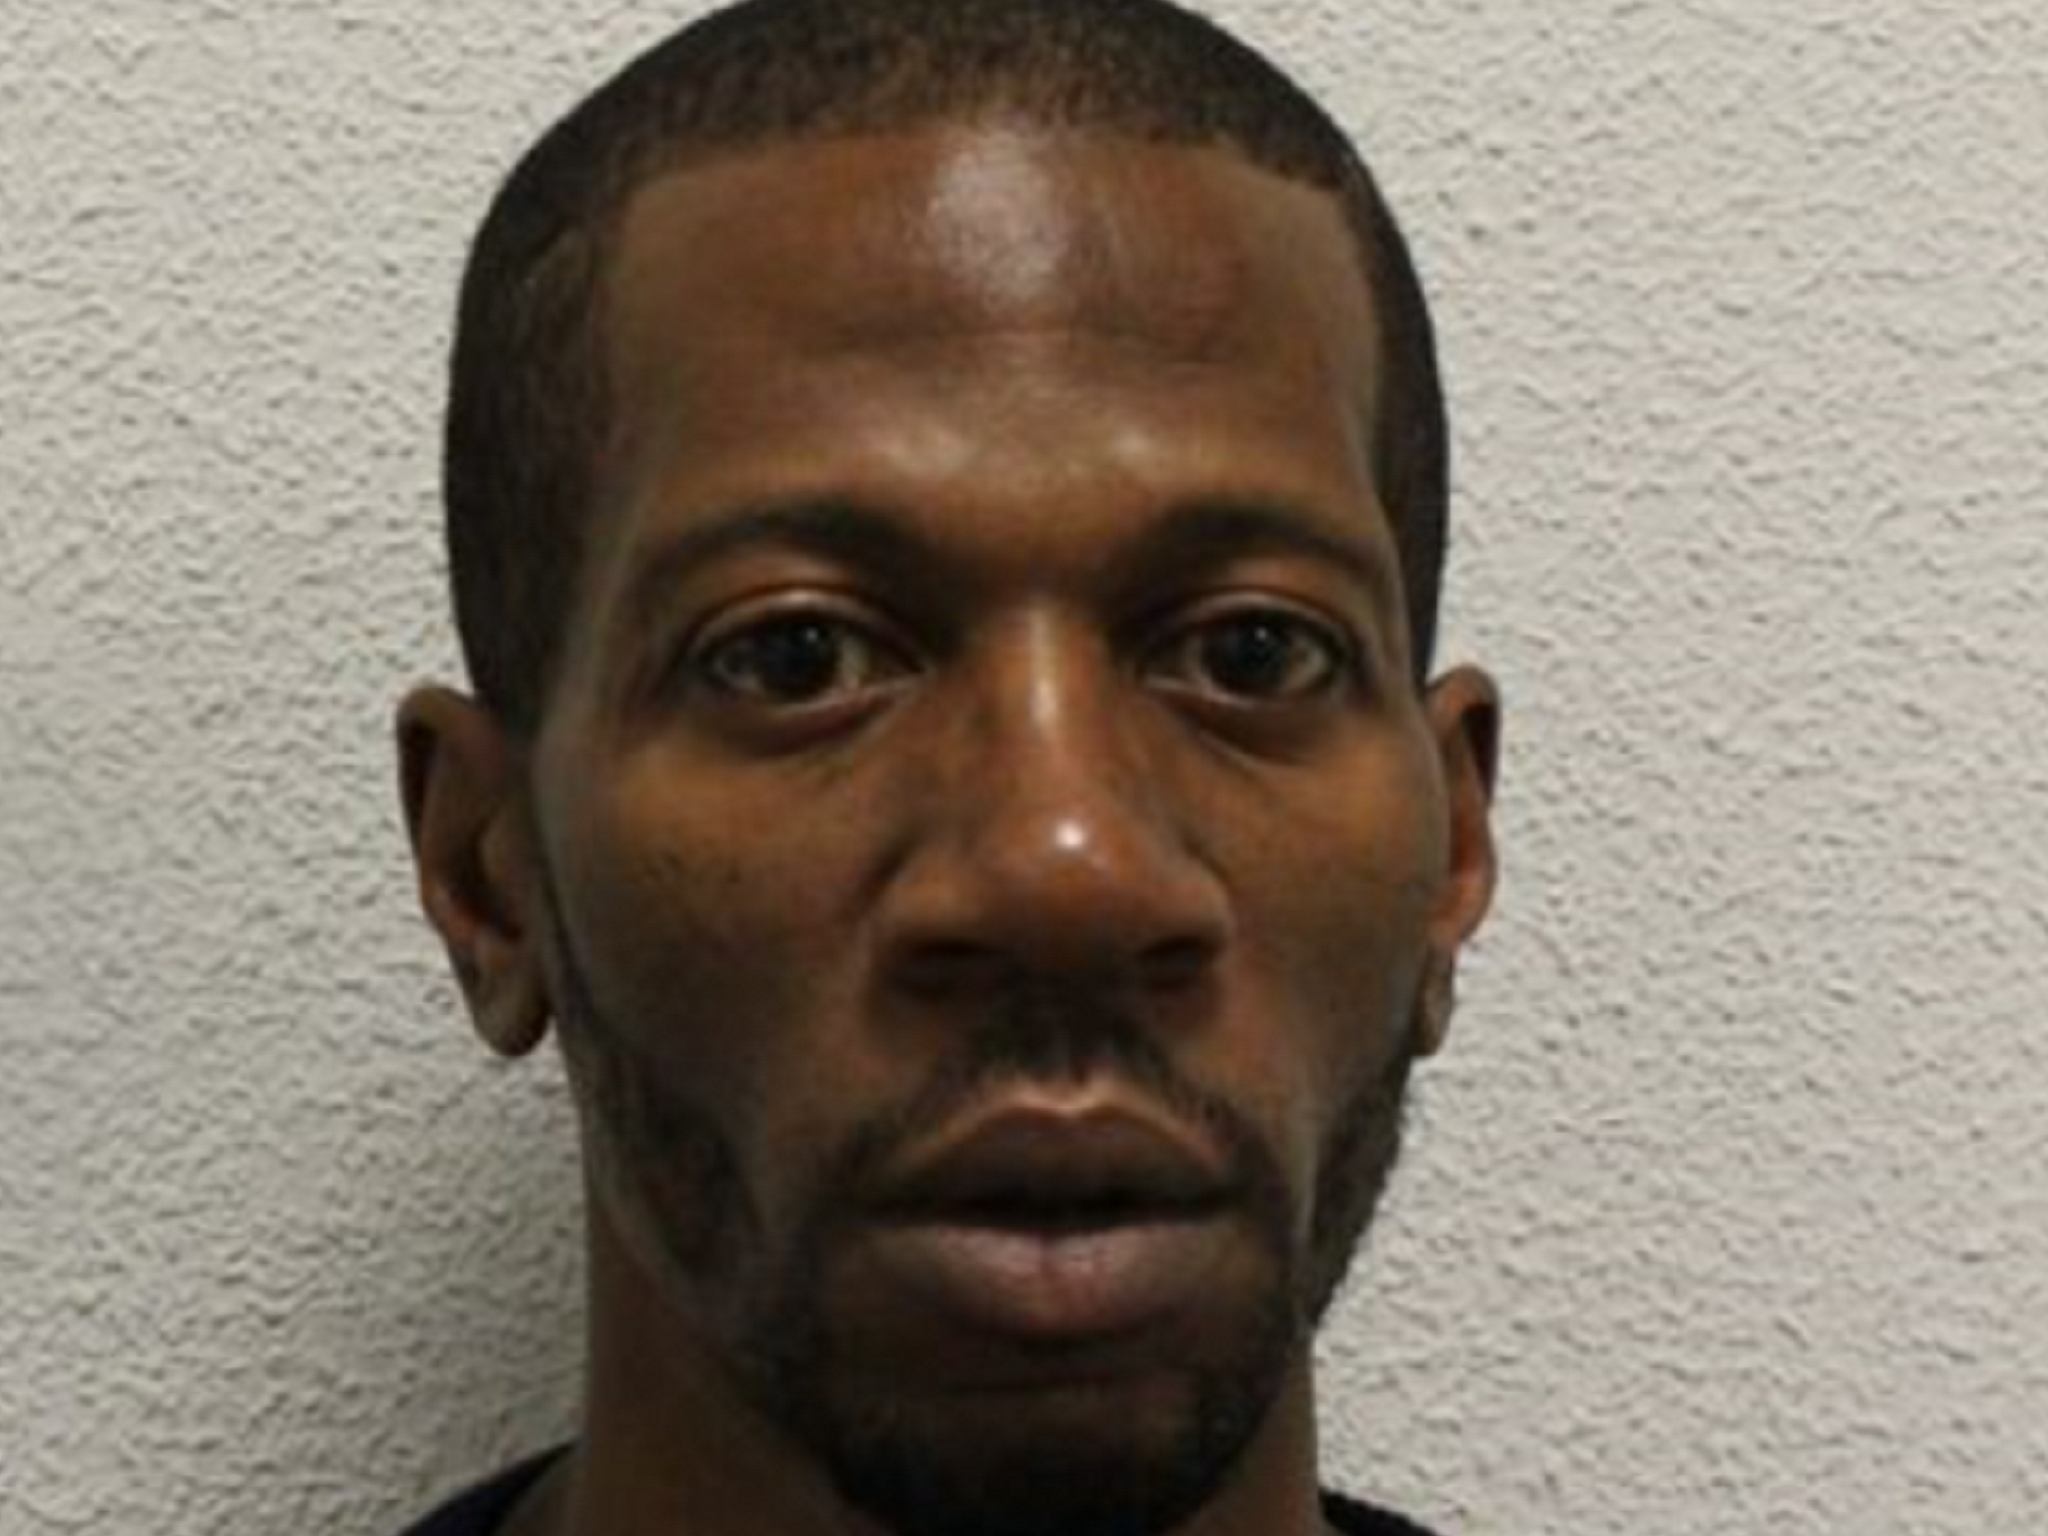 Reuben Richardson, 38, has been jailed for eight years after killing safety patrol cyclist Antonio Marchesini, 51, in a hit and run collision in Deptford, southeast London, on 3 June, 2018.